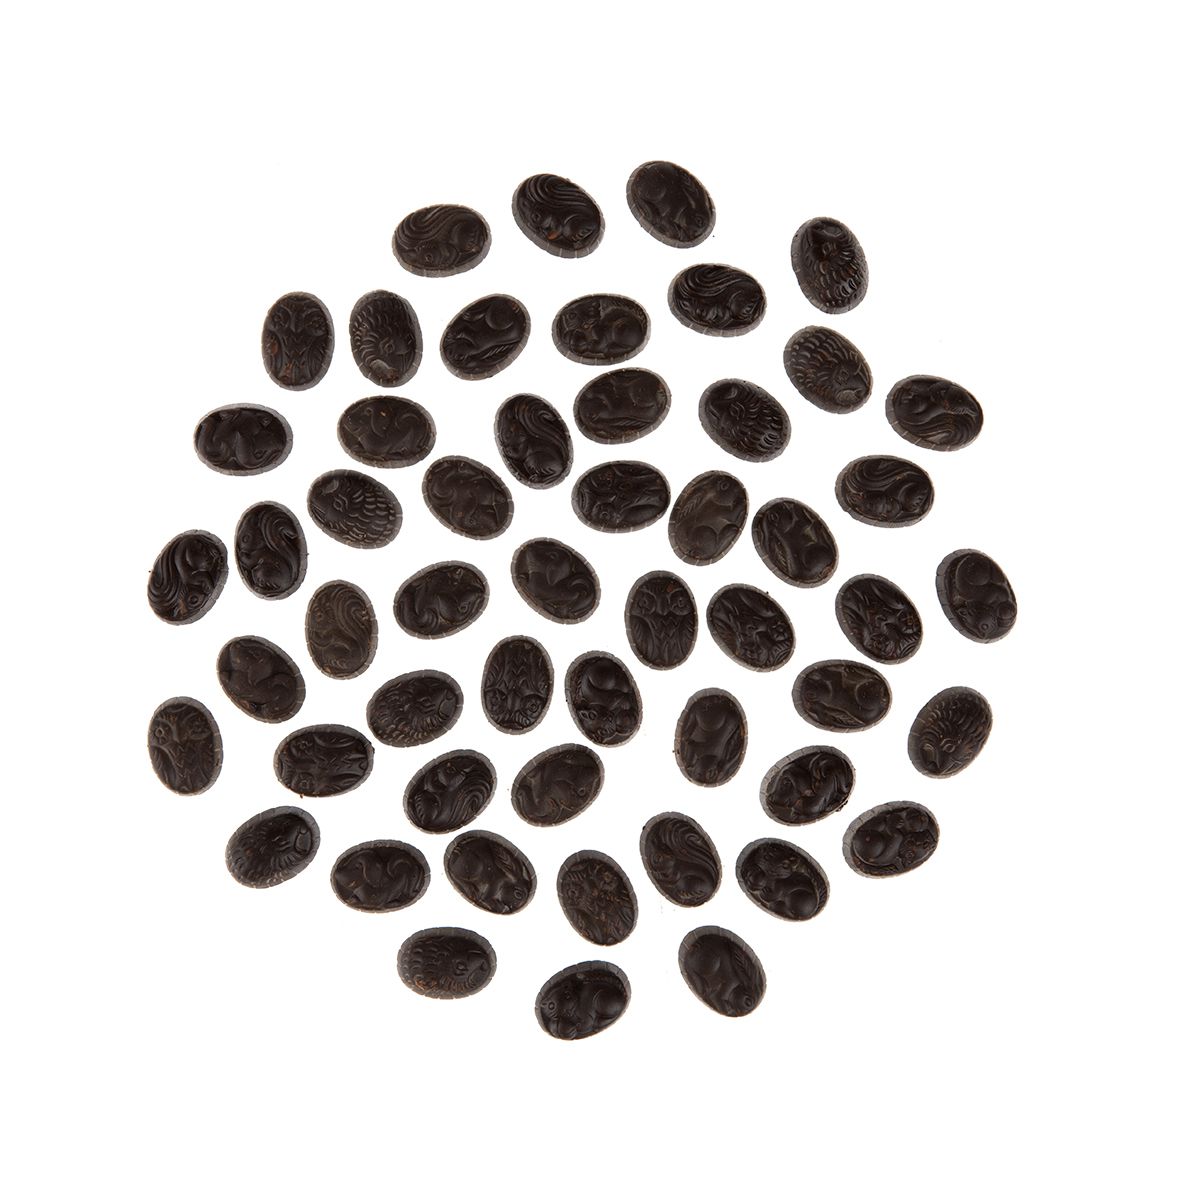 Tcho Chocolate Vegan 100% Unsweetened Chocolate Couverture Drops